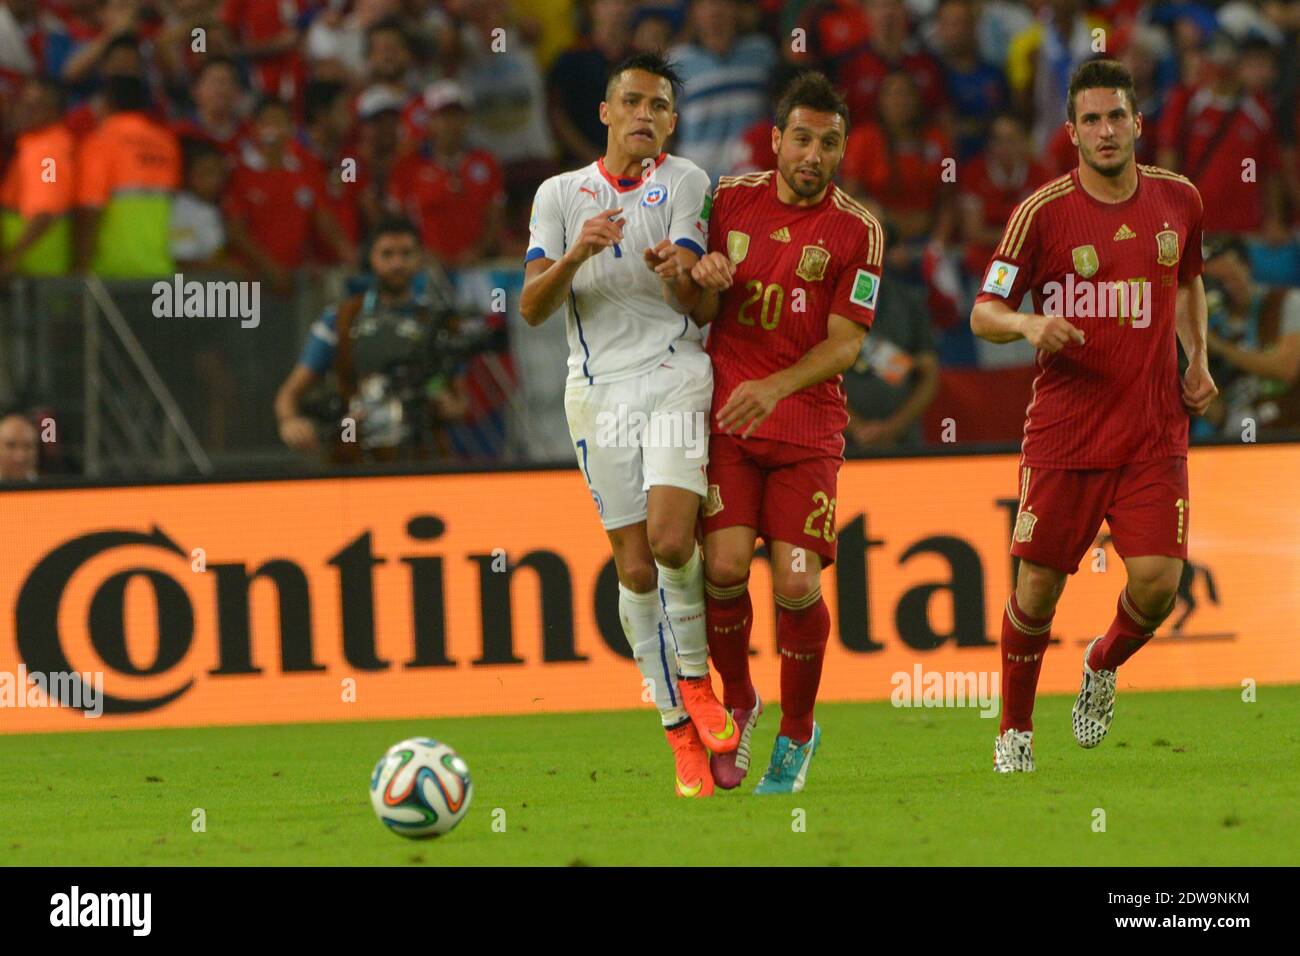 Spain's Santi Cazorla battling Chile's Alexis Sanchez during Soccer World Cup 2014 First round Group B match Spain v Chile at Maracana Stadium, Rio de Janeiro, Brazil , on June 18, 2014. Chile won 2-0 and ousted the defending champions from the competition. Photo by Henri Szwarc/ABACAPRESS.COM Stock Photo